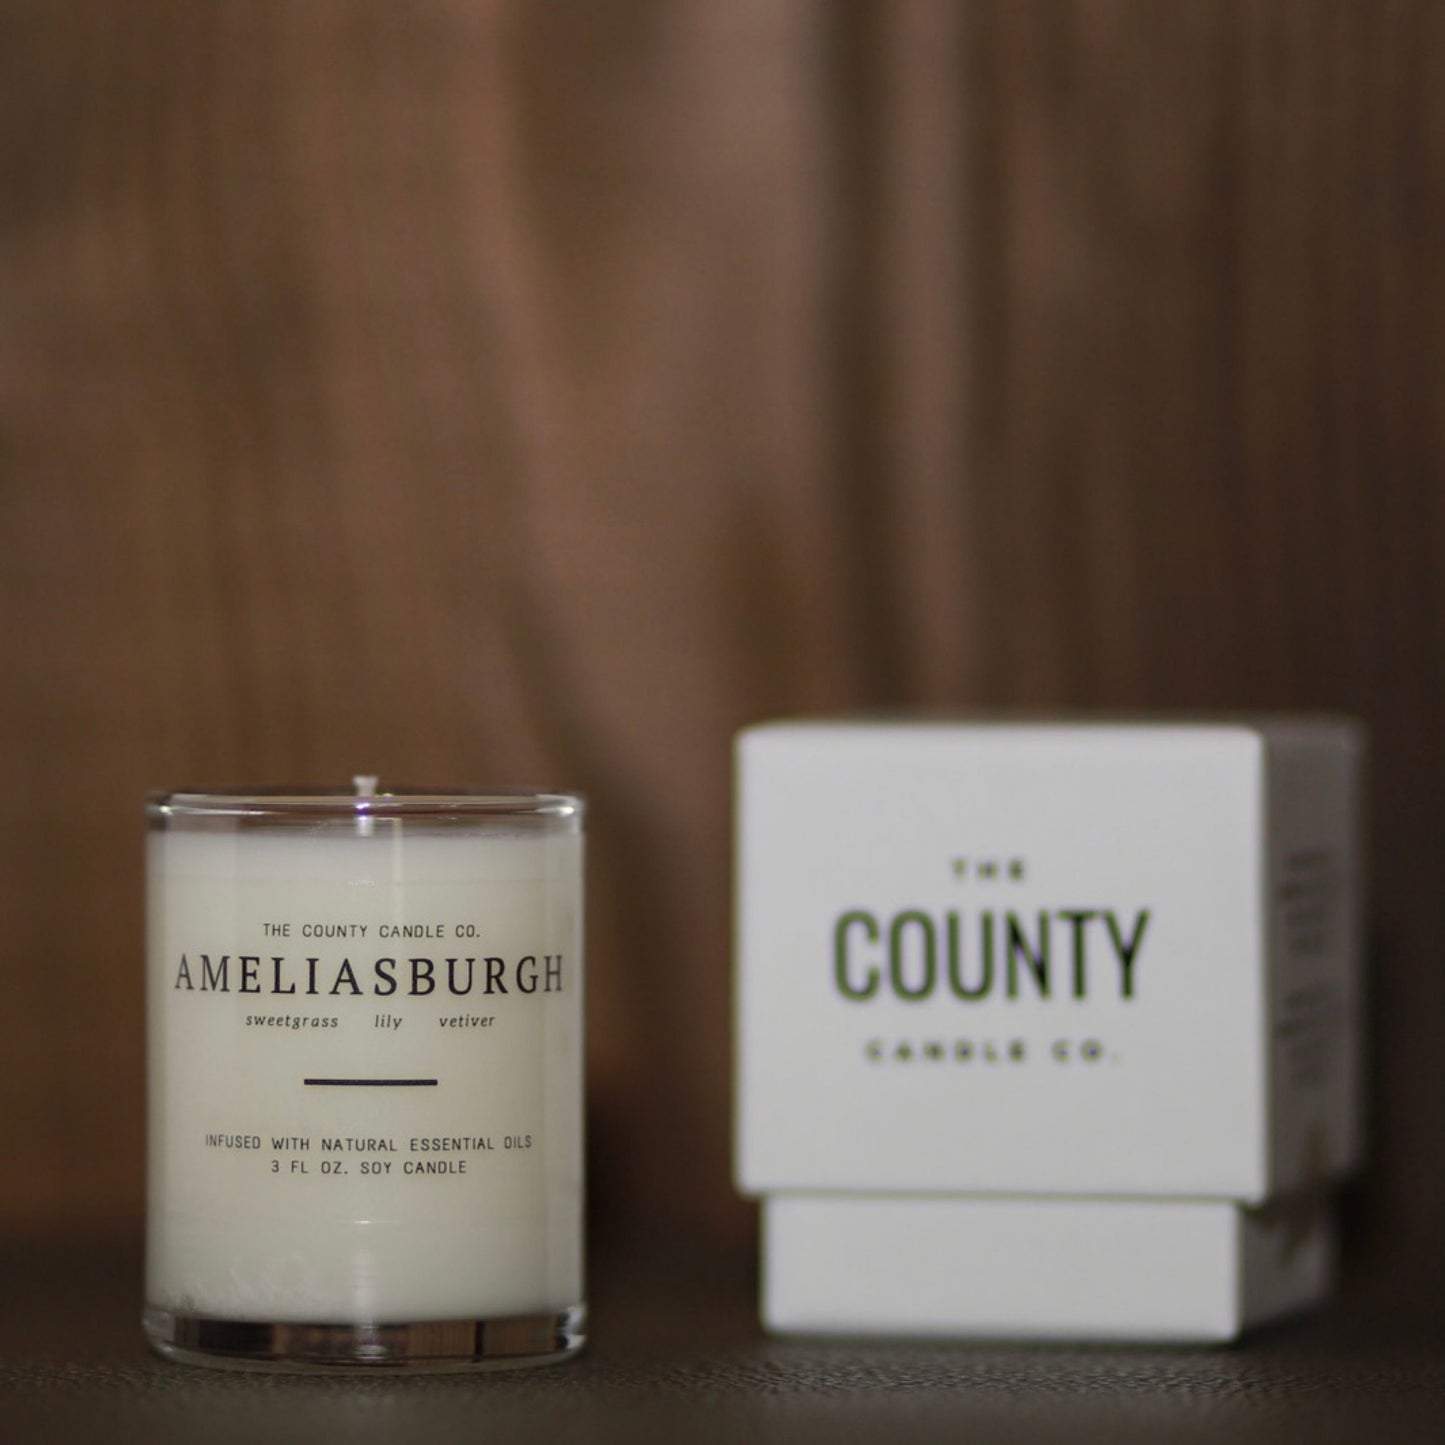 Ameliasburgh | The County Candle Co.